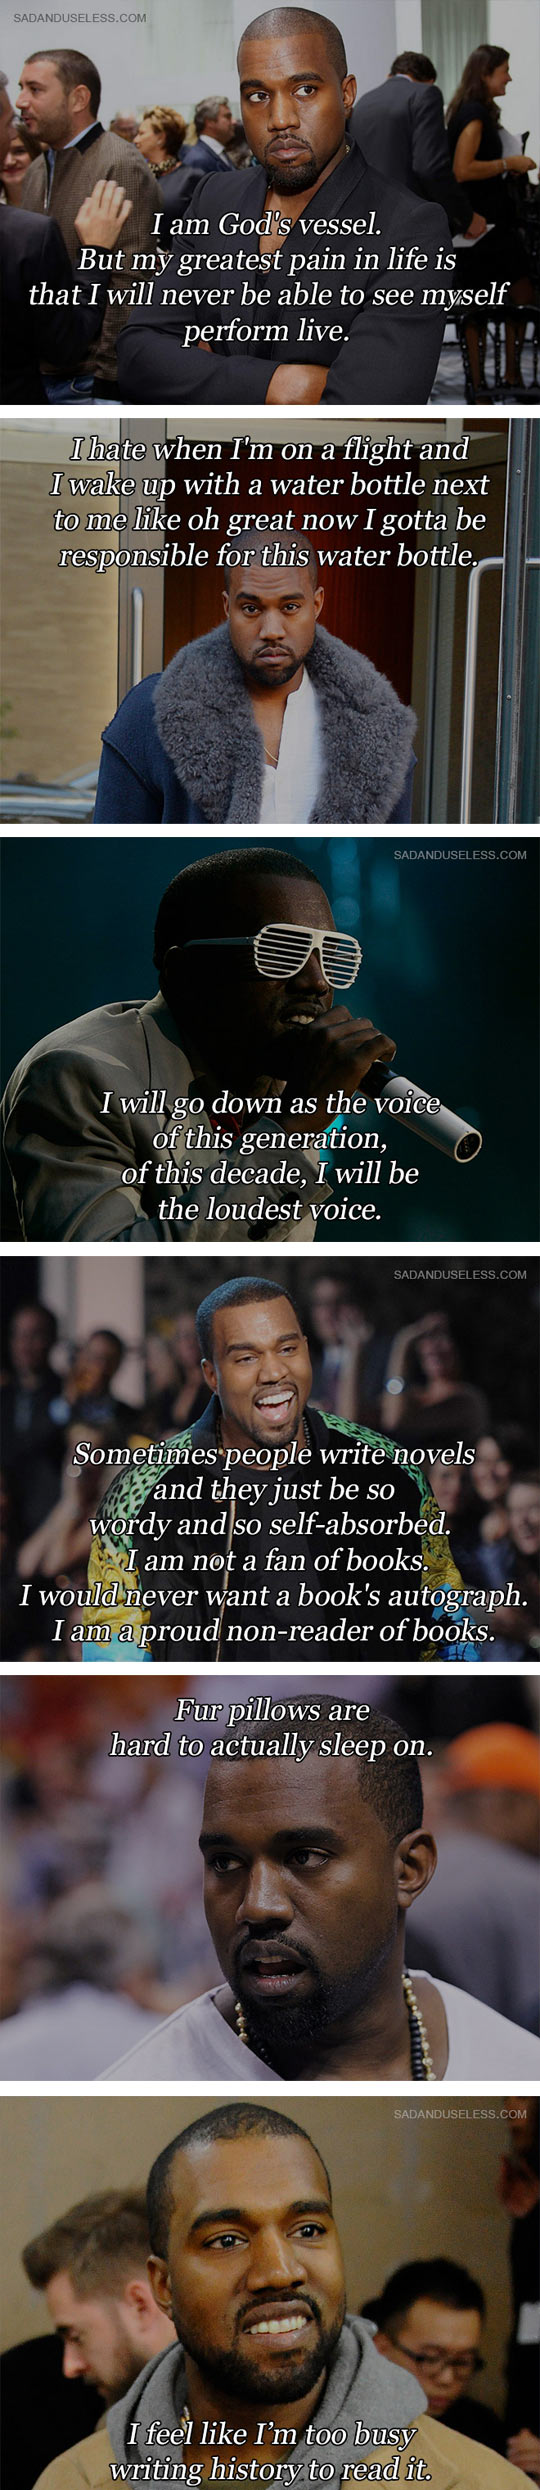 Some Kanye West Quotes